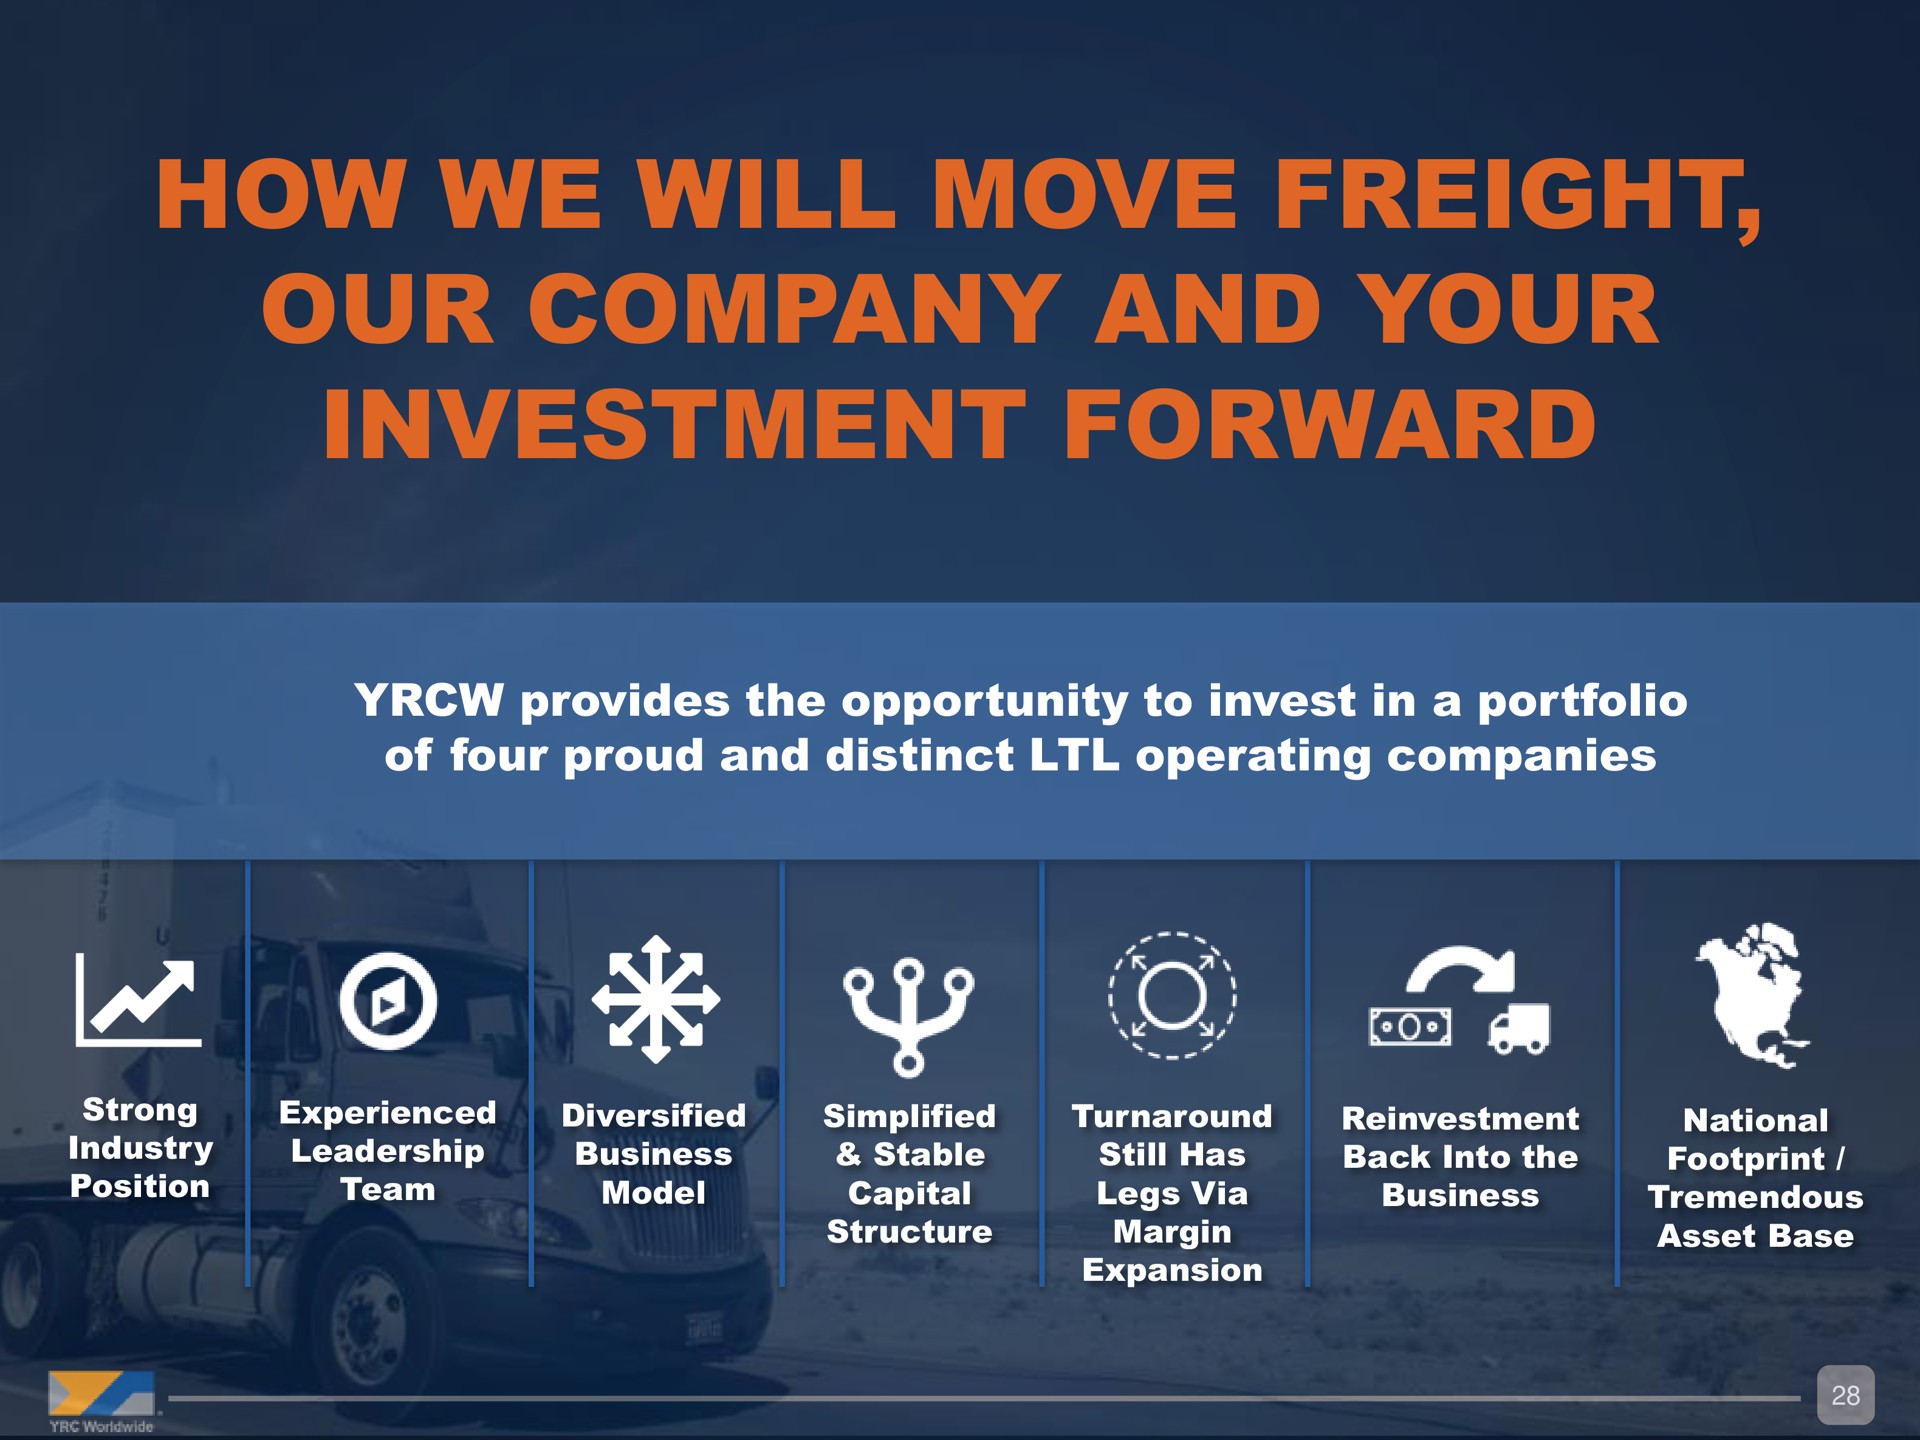 how we will move freight our company and your investment forward | Yellow Corporation